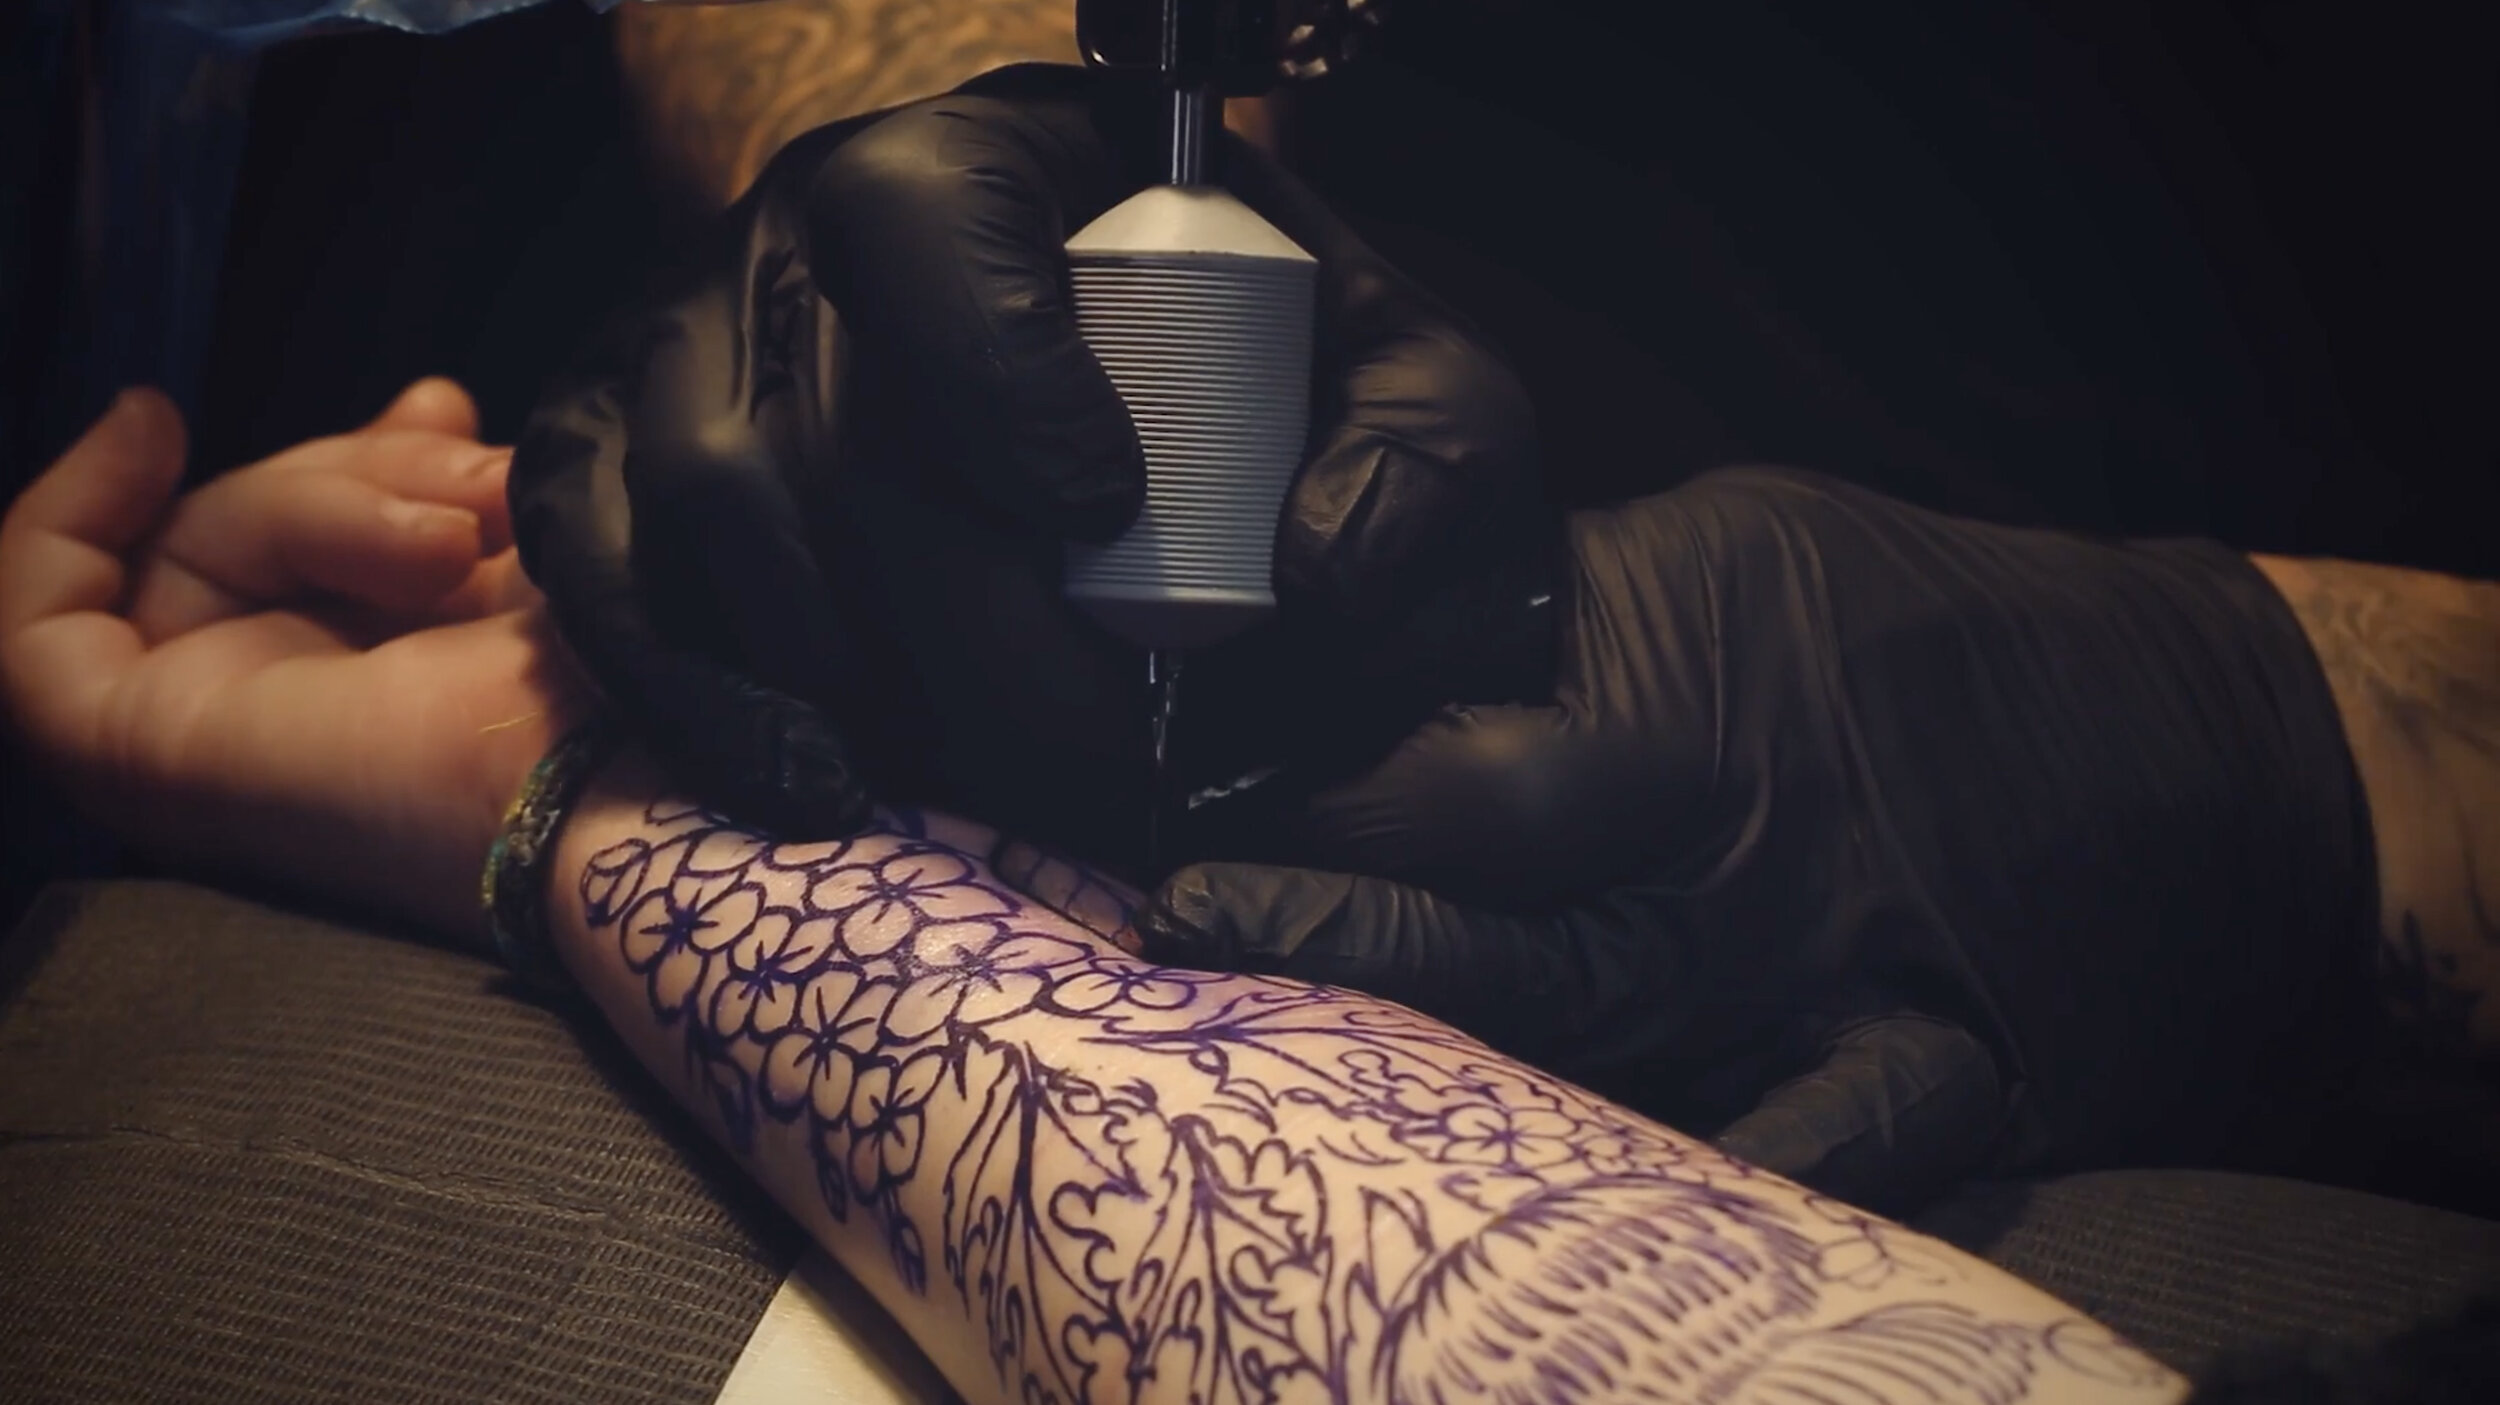 These Tattoos Turn Scars Into Works of Art